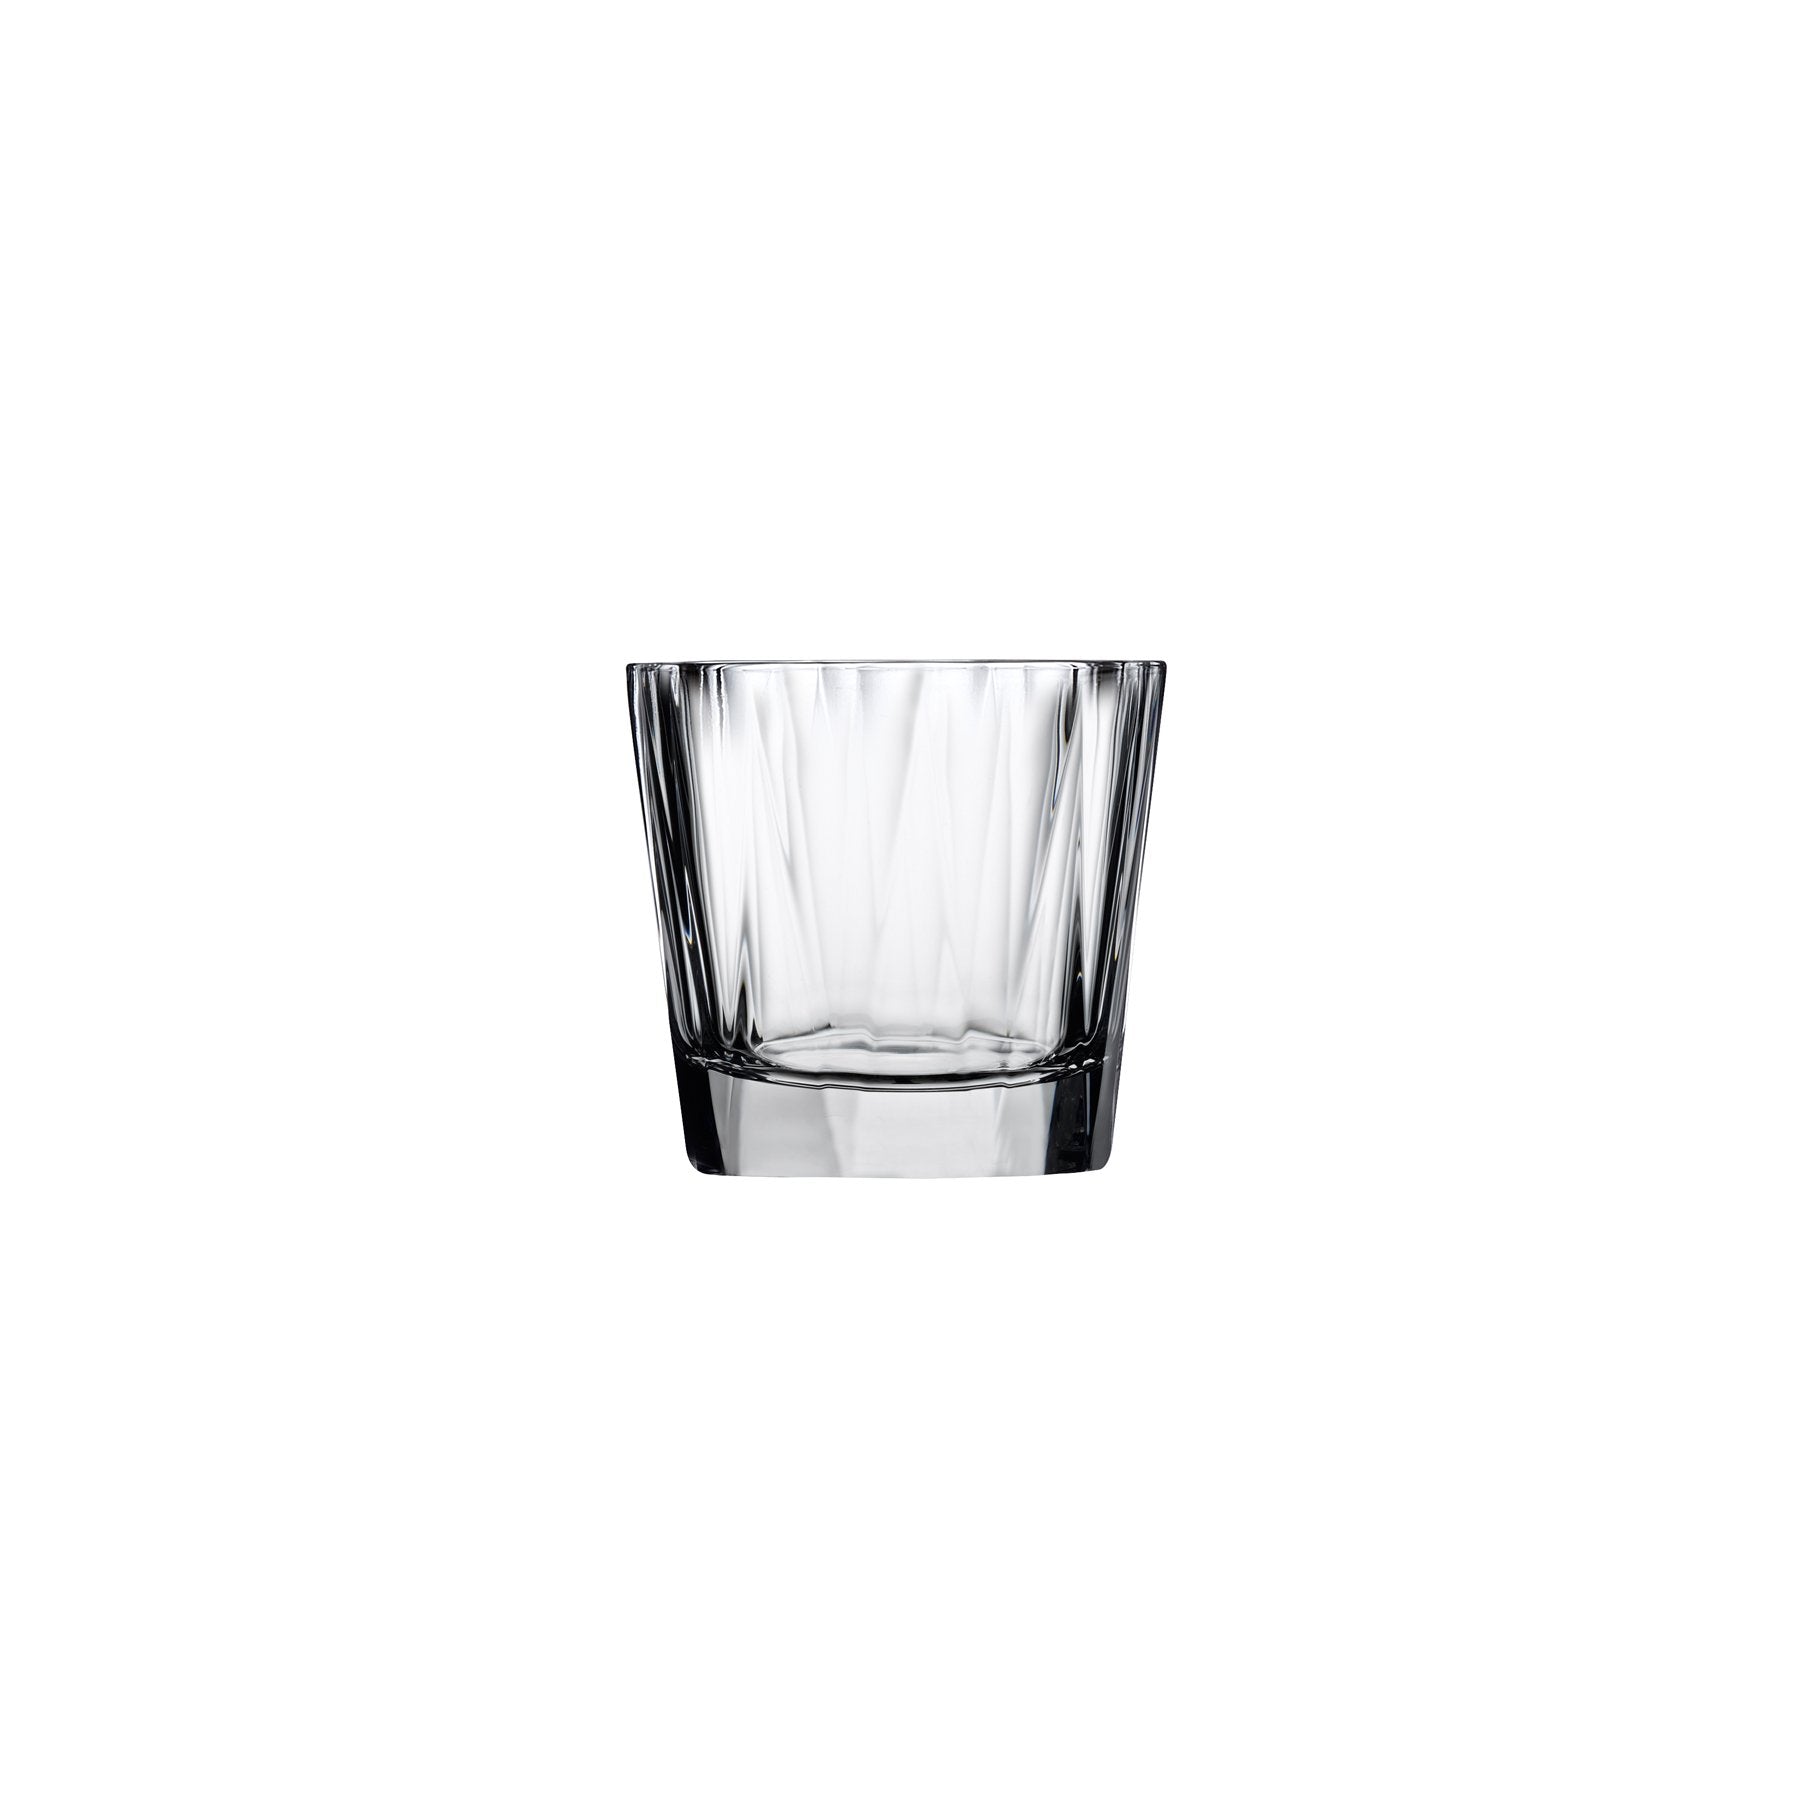 hemingway set of 4 whisky glasses by nude at adorn.house